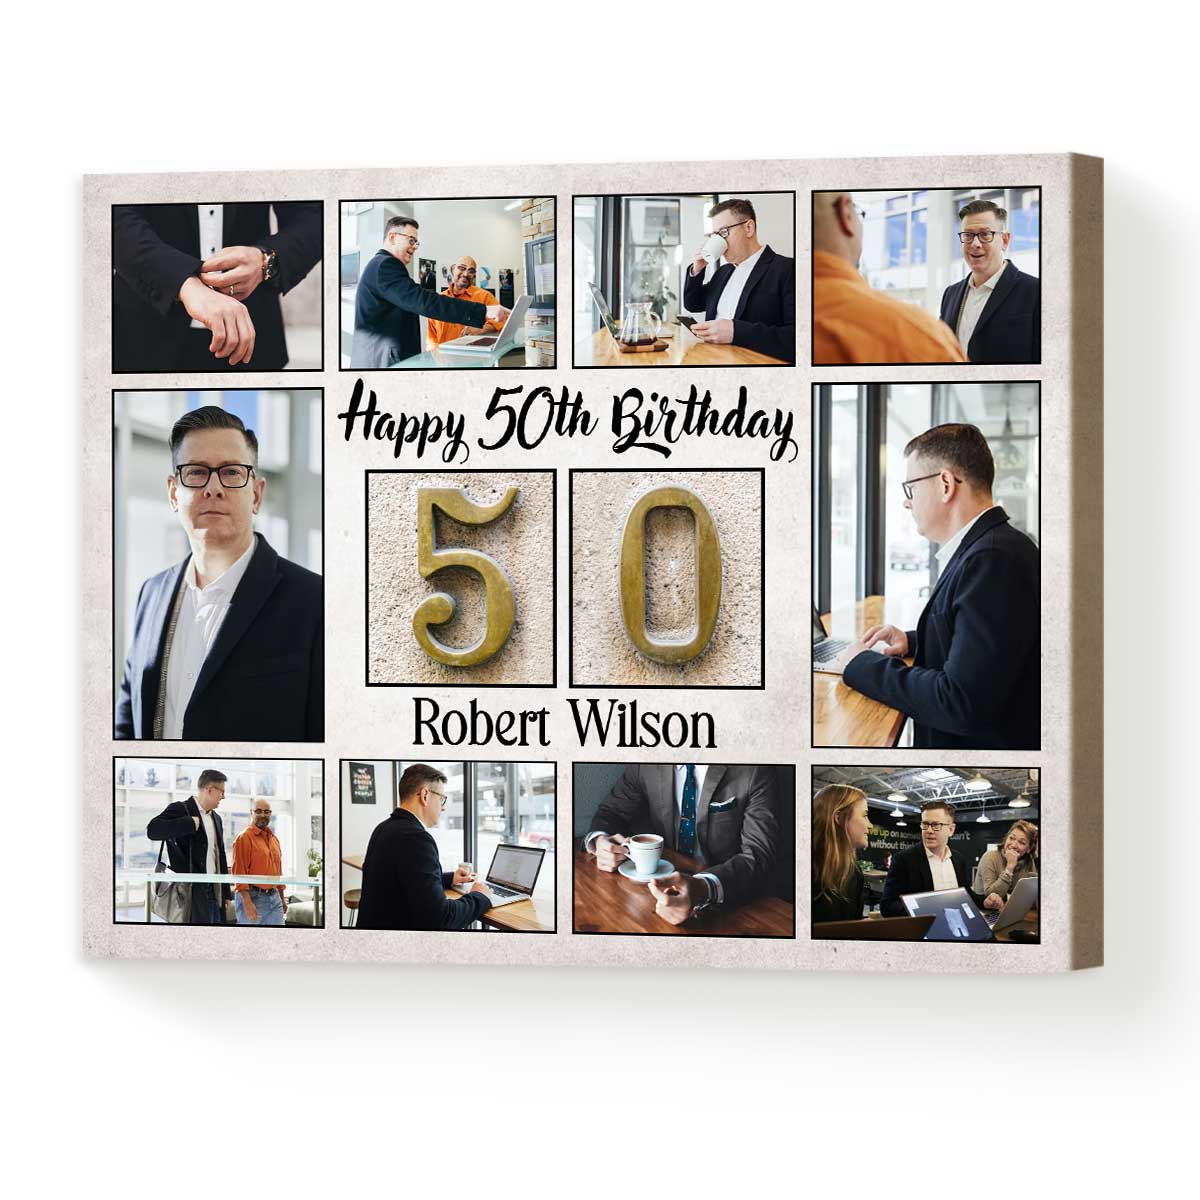 https://benicee.com/wp-content/uploads/2022/09/Personalized-50th-Birthday-Picture-Collage-Canvas-50th-Birthday-Gift-Idea-for-Dad-for-Man-2.jpg